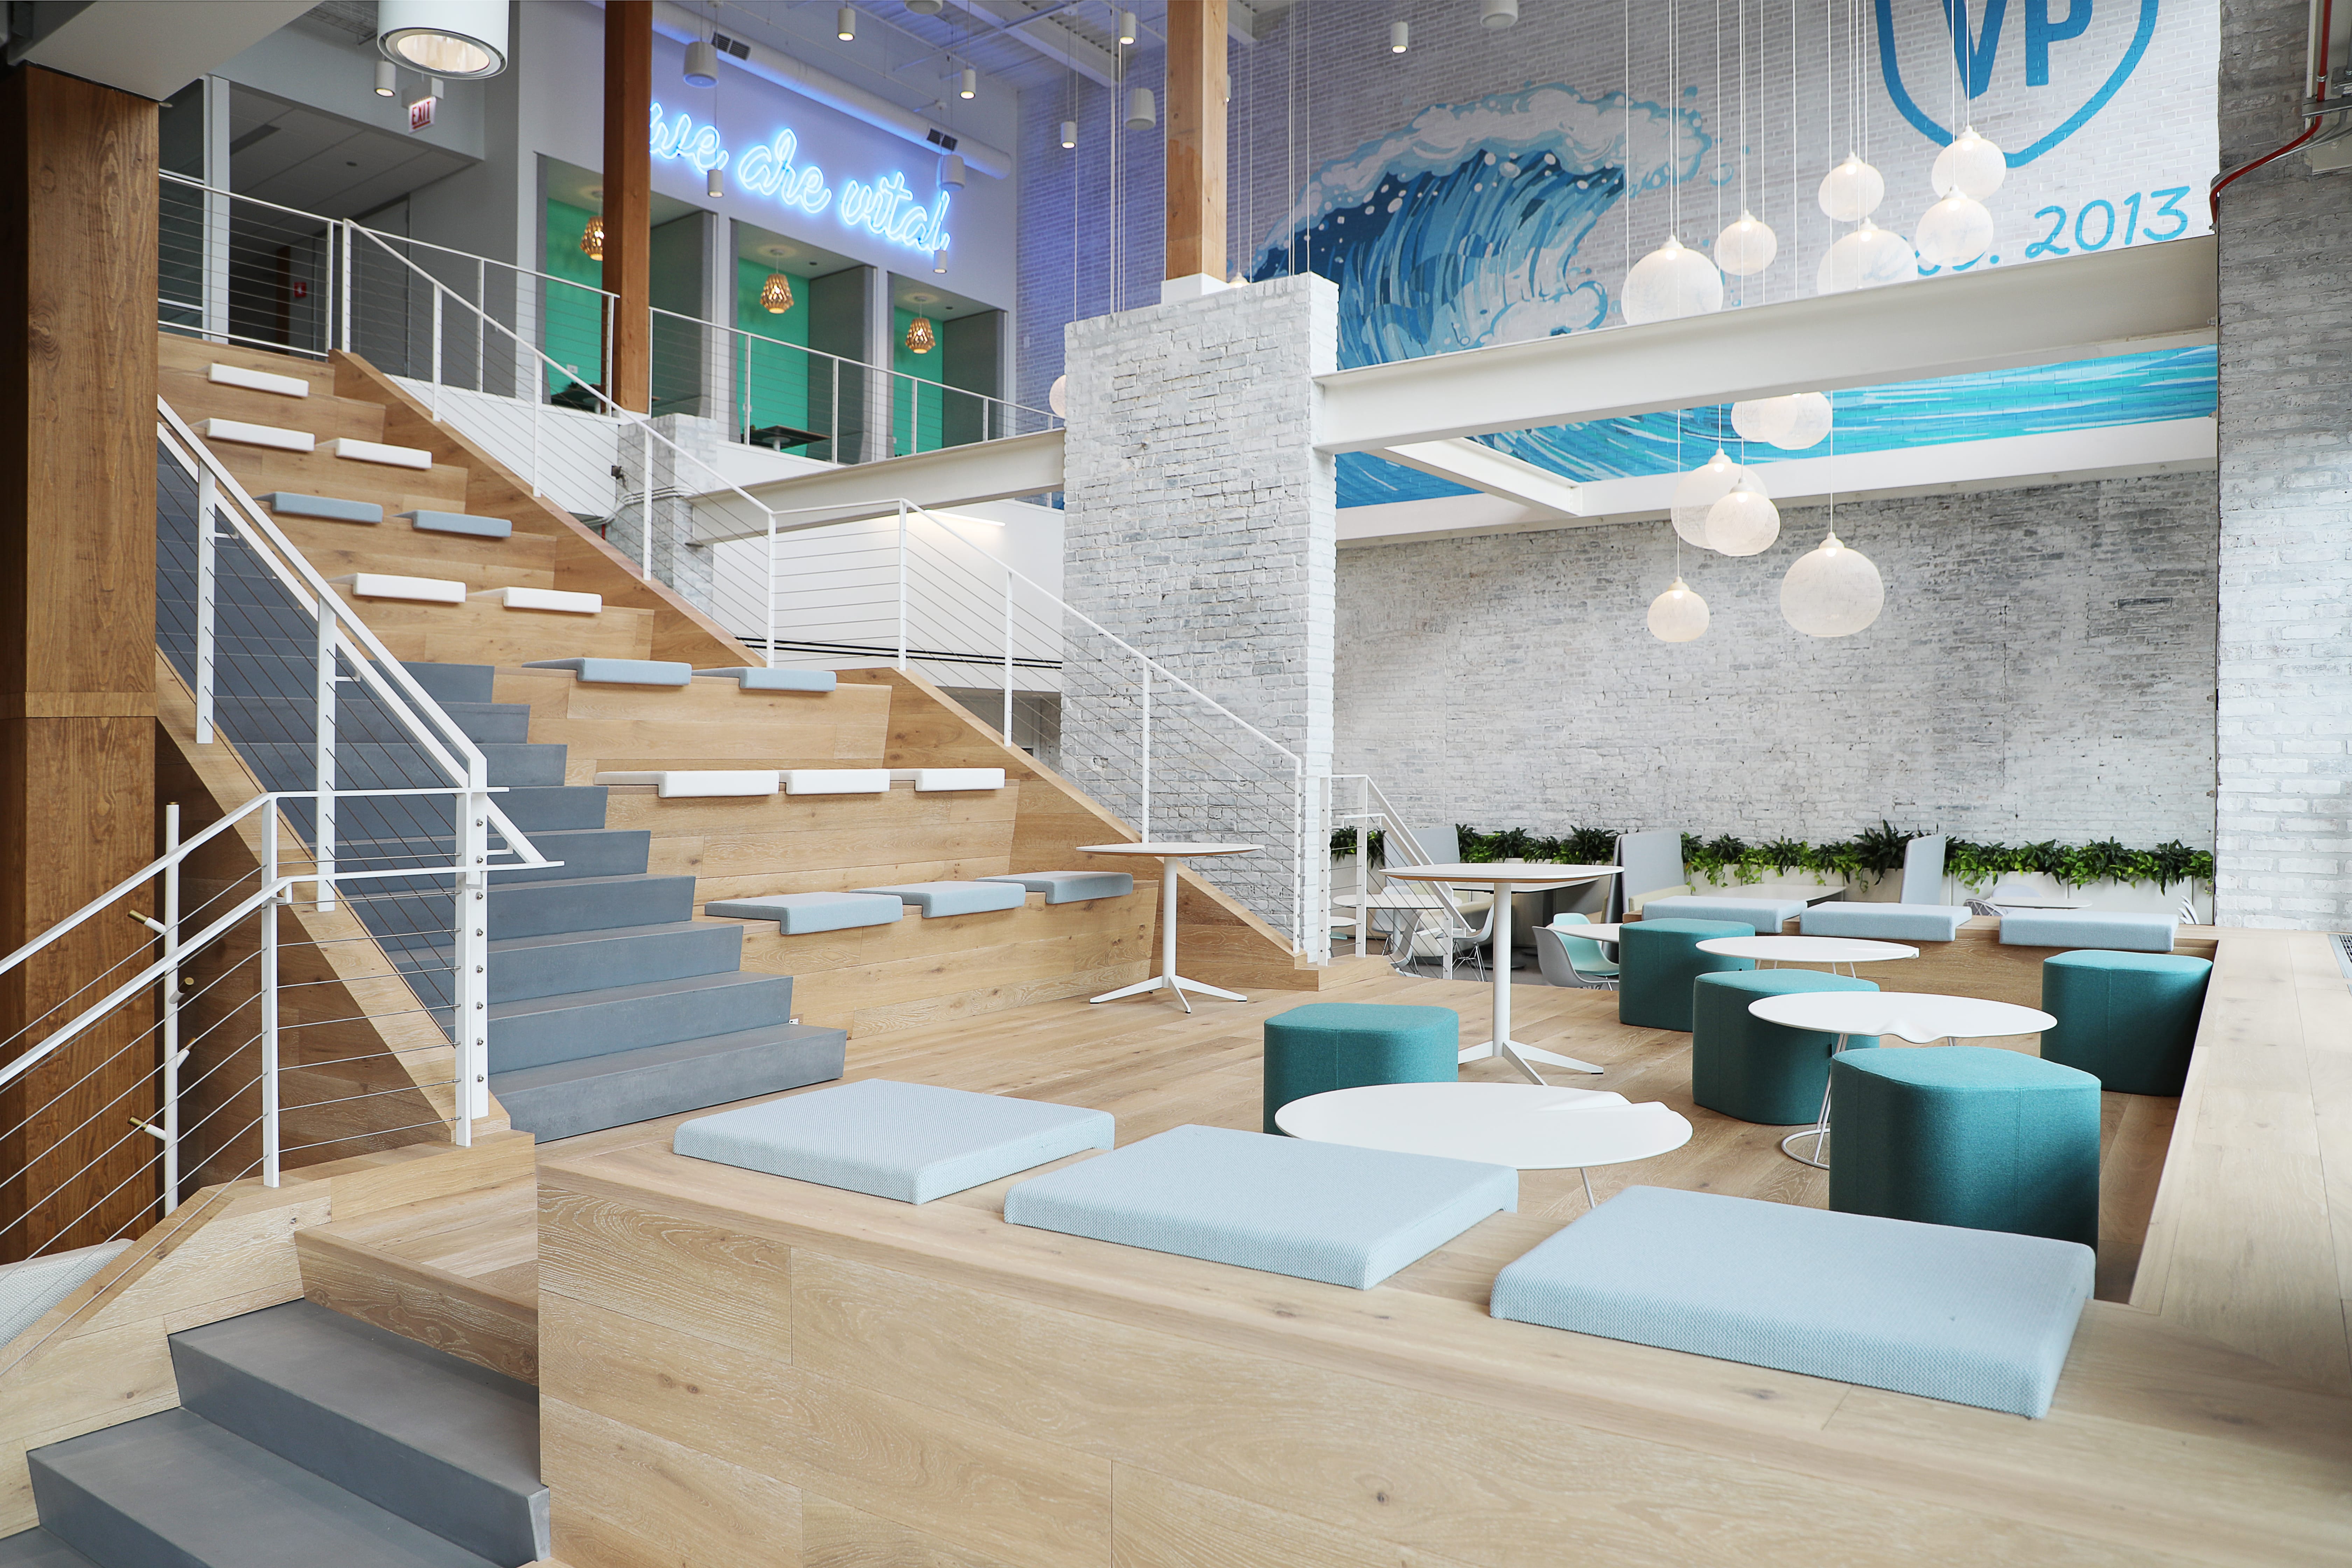 ‘Isolation Is The Enemy’: Next-Gen Office Designs Focus On Togetherness